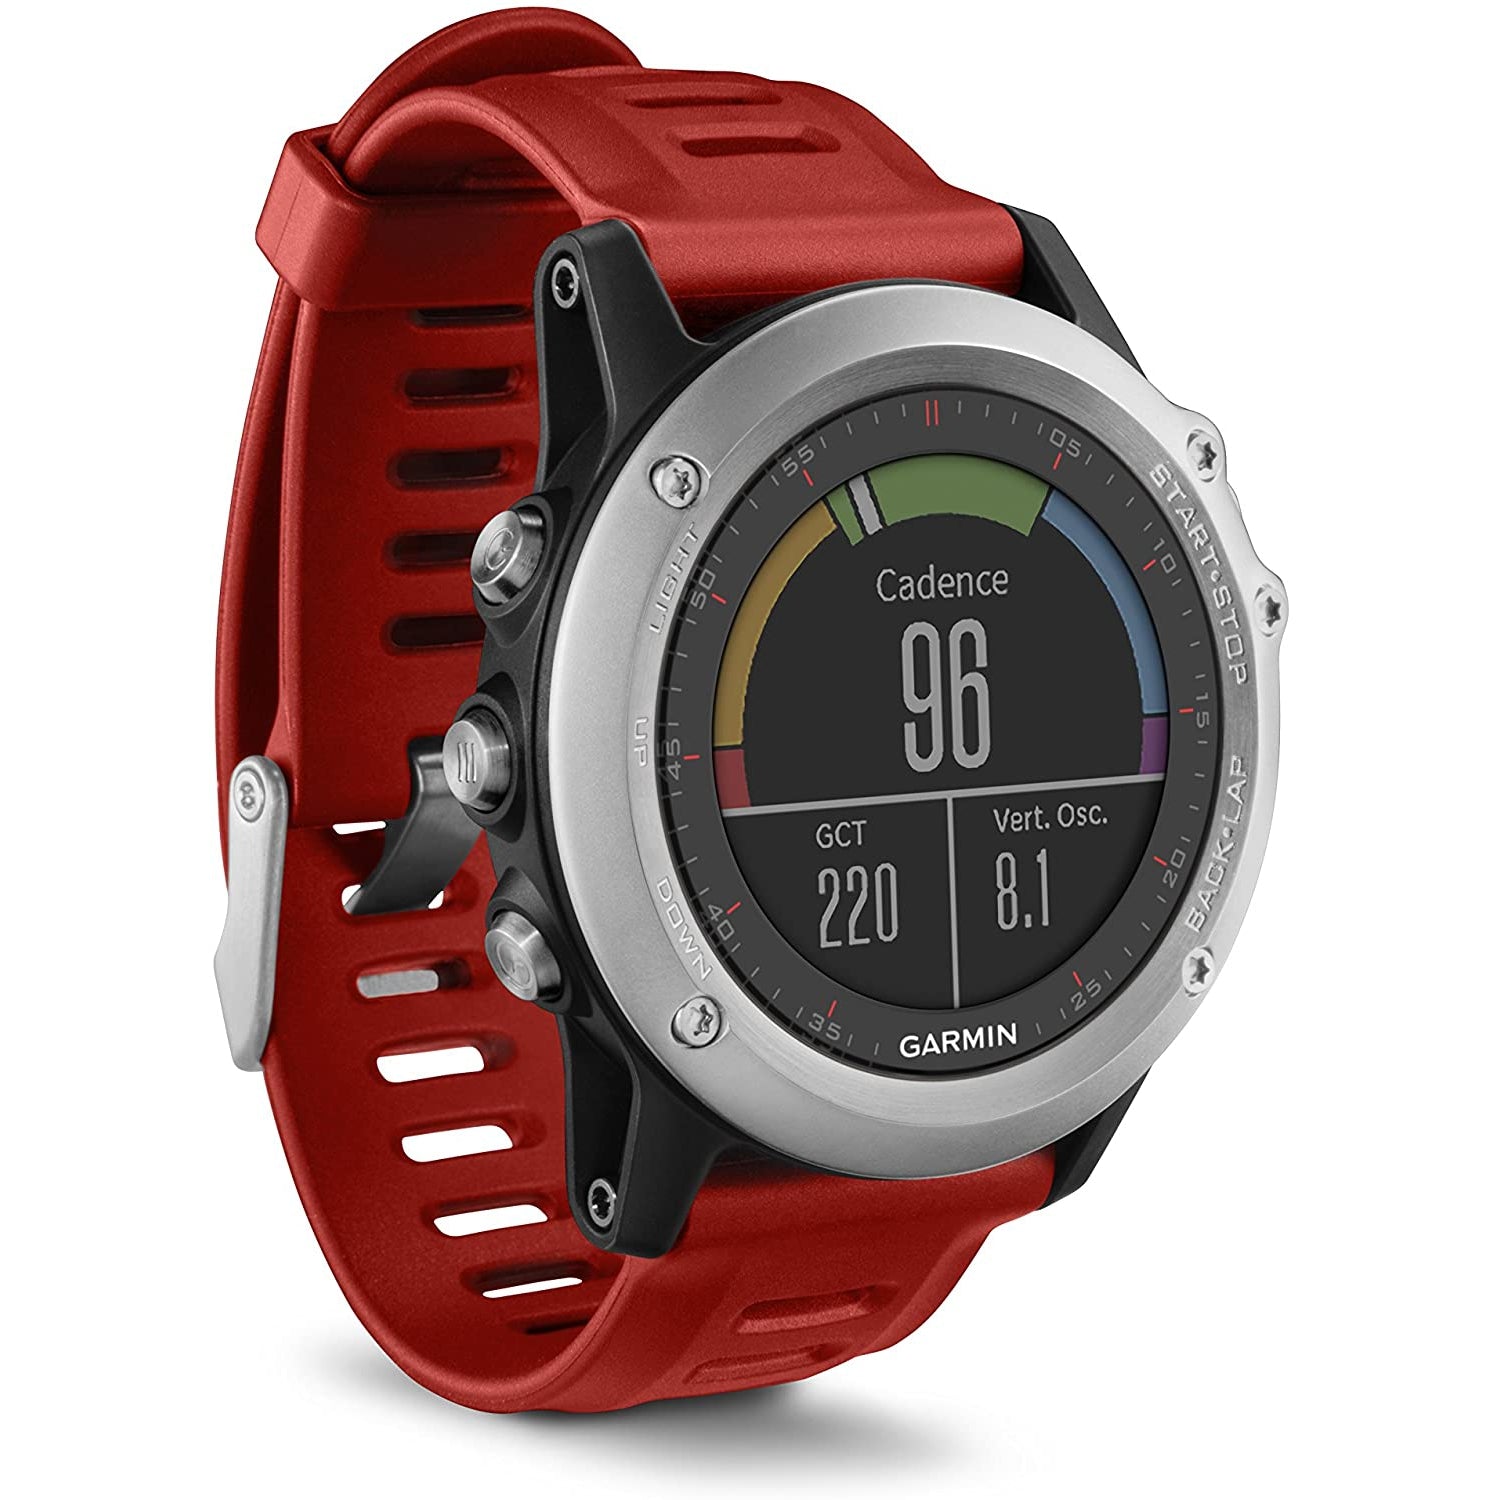 Garmin Fenix 3 GPS Multisport Watch with Outdoor Navigation - Silver With Red Strap